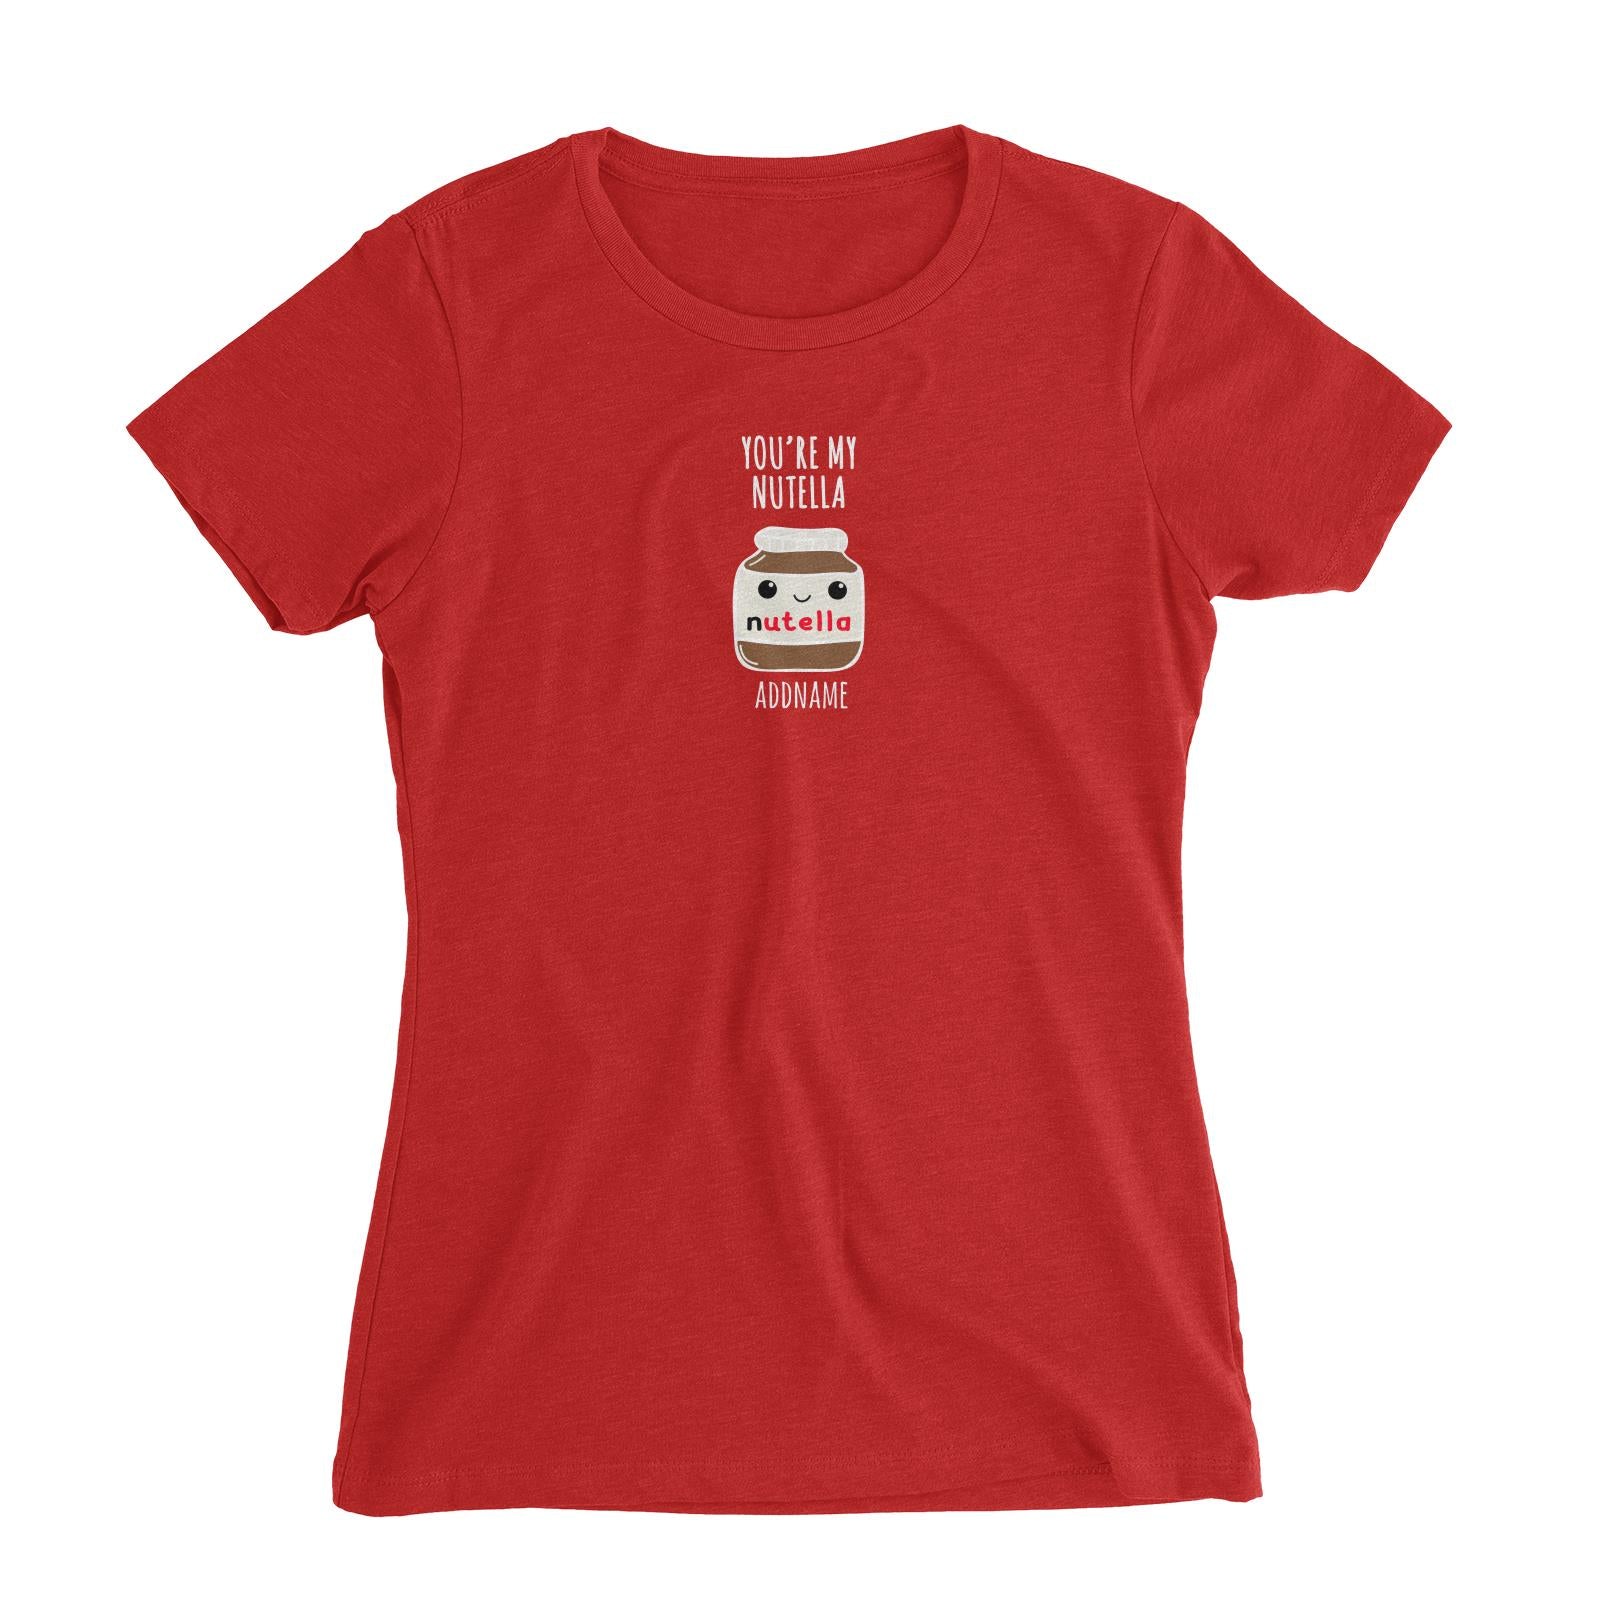 Couple Series You're My Nutella Addname Women Slim Fit T-Shirt